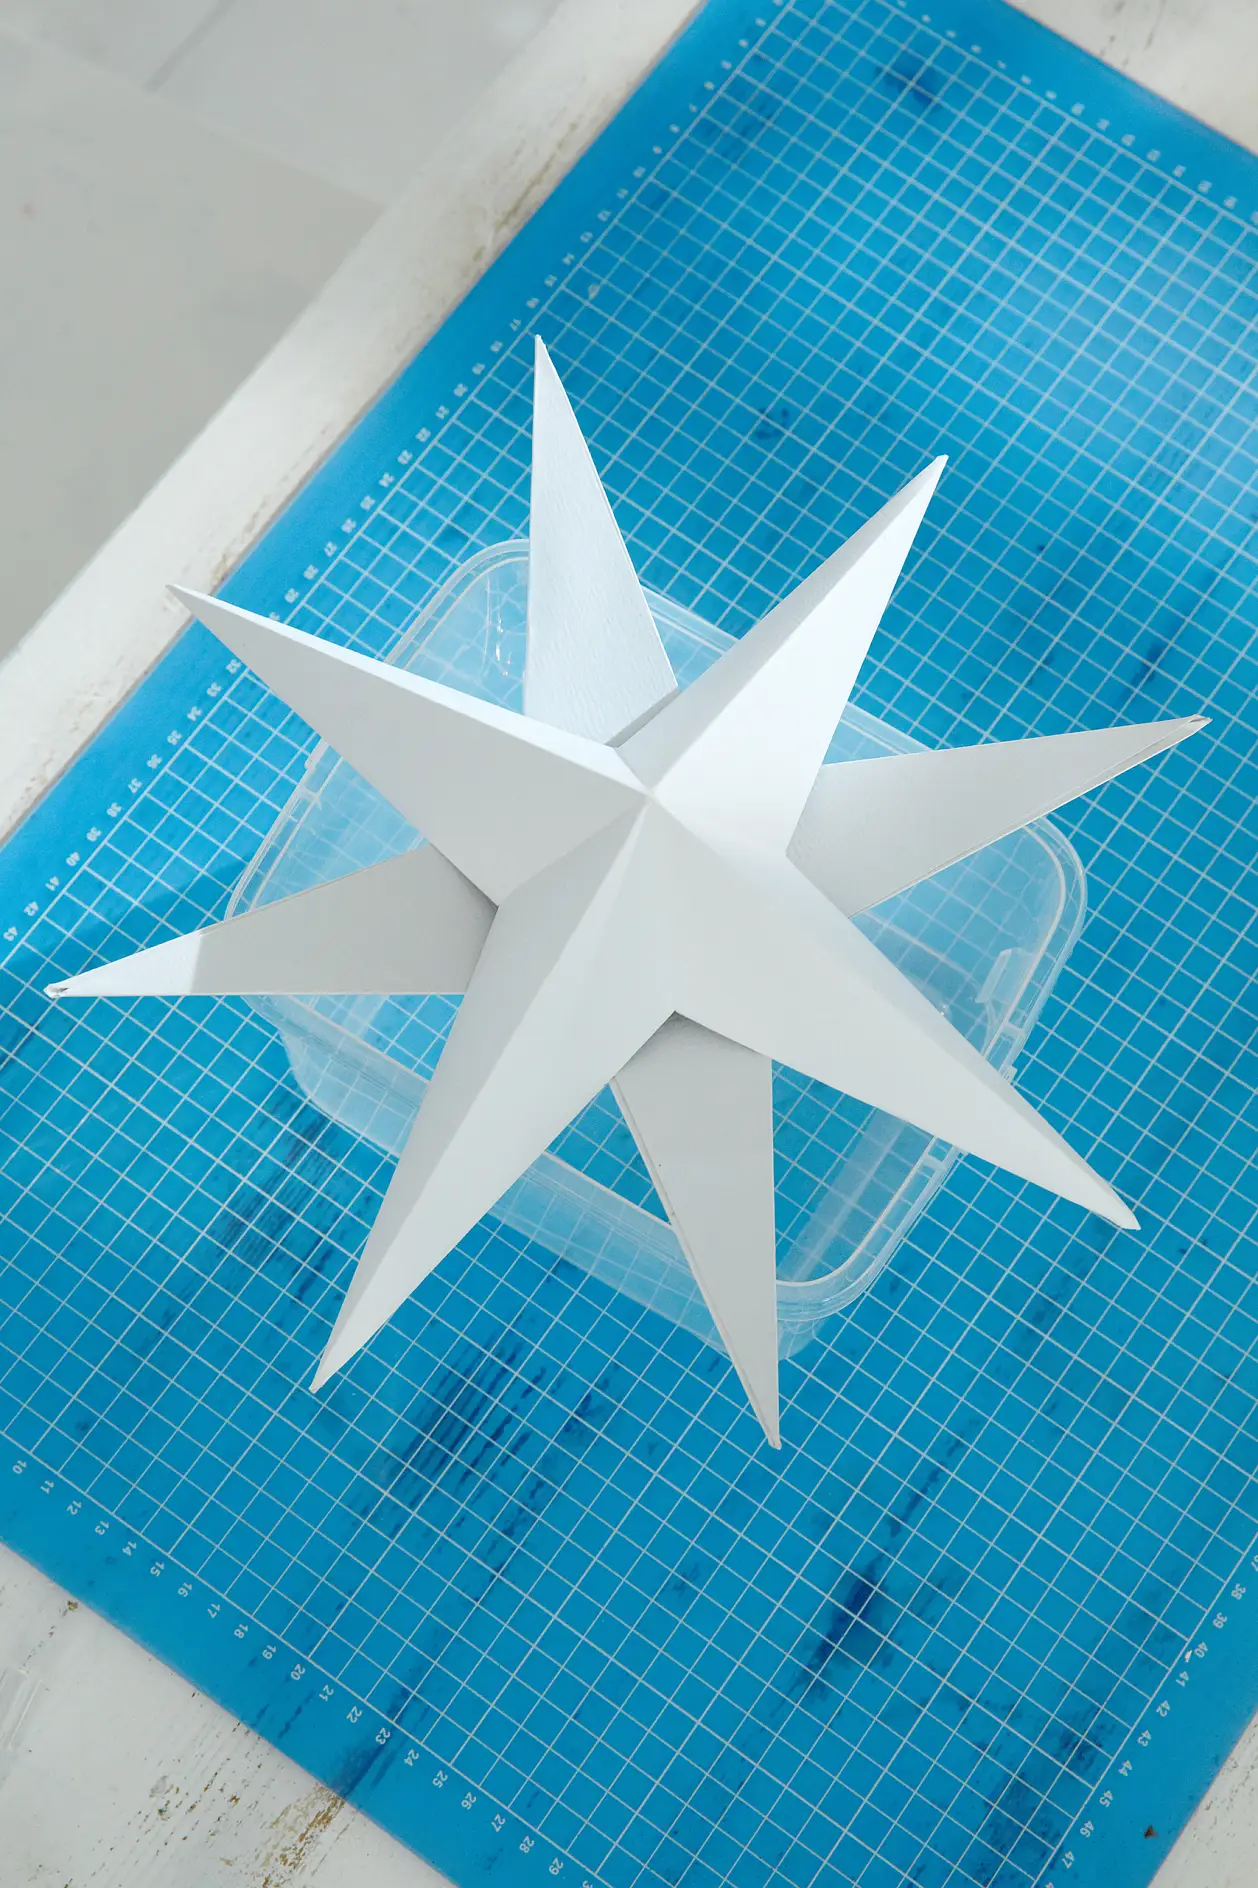 DIY Paper Stars / Step 14: Glue stars to each other according to the markings